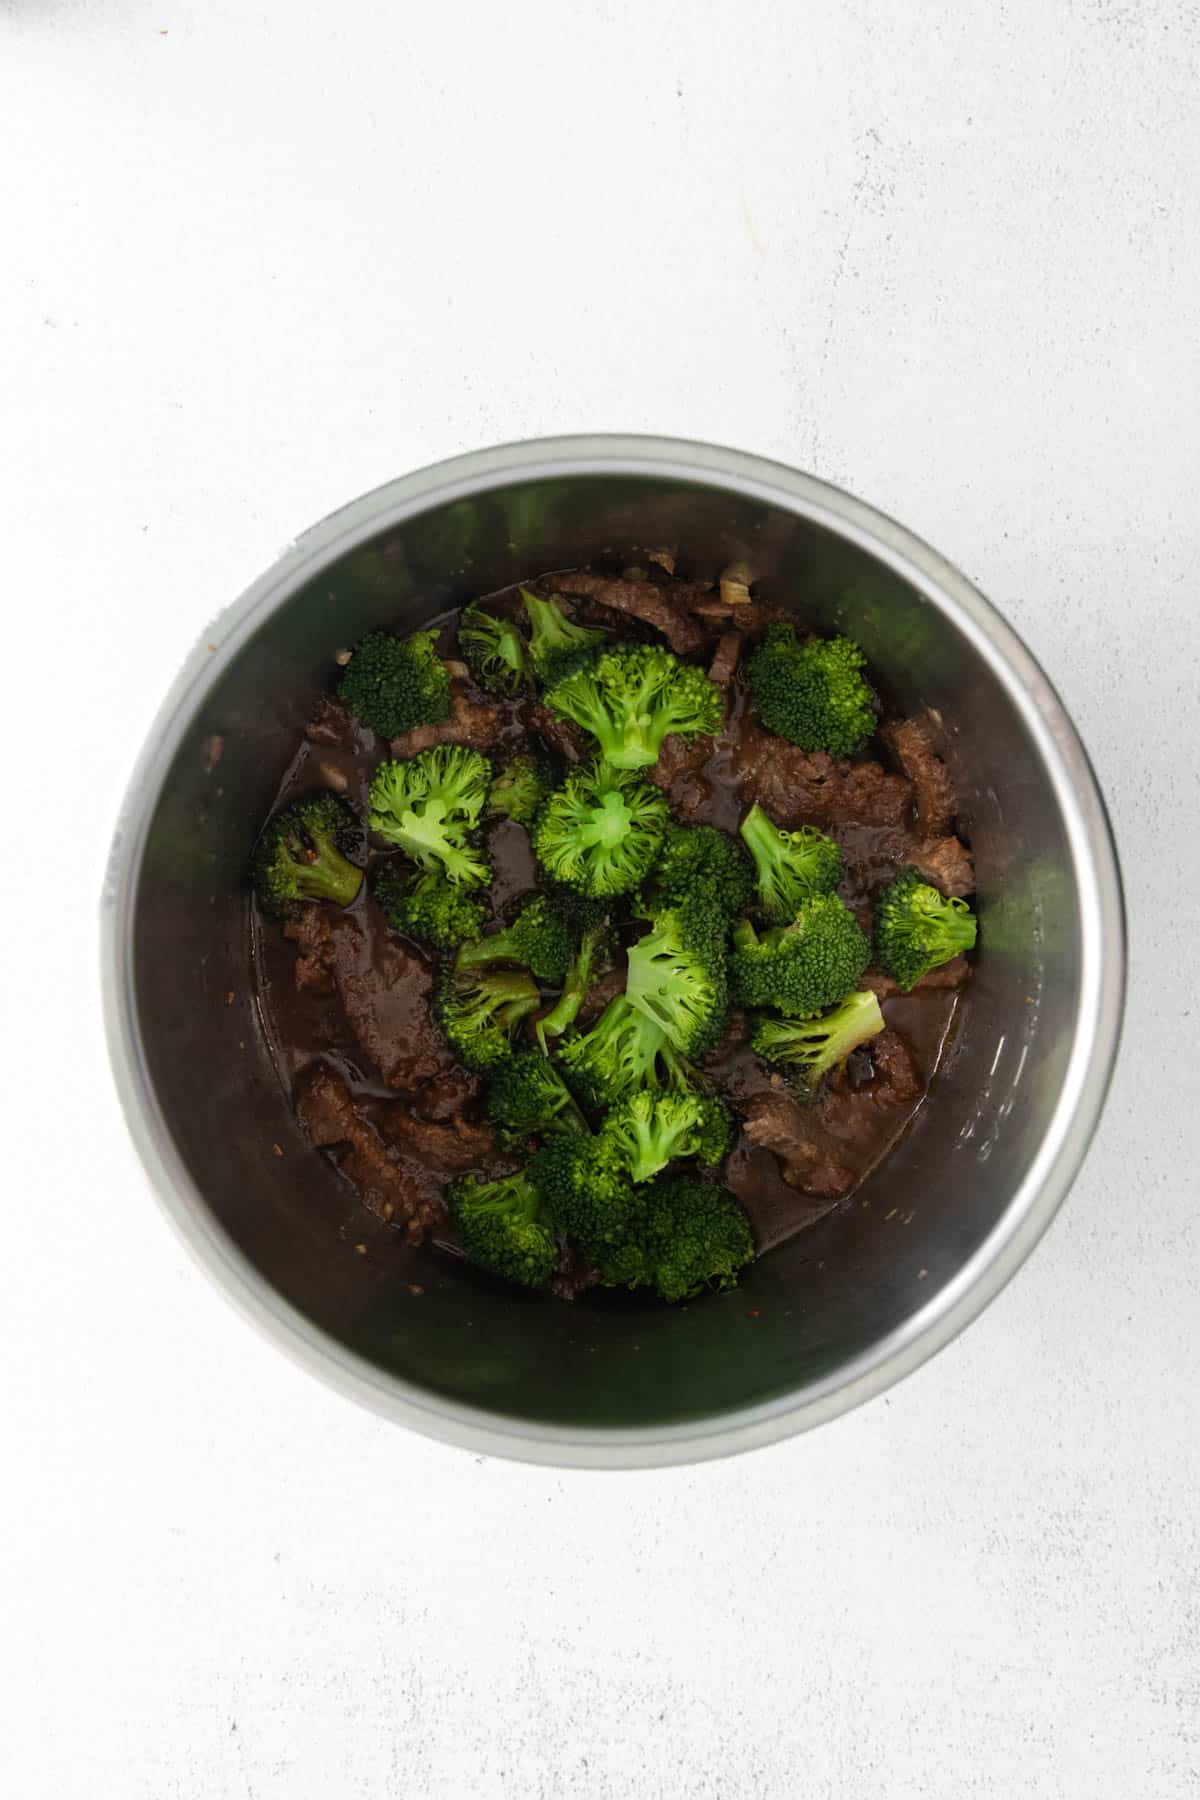 Finished beef and broccoli made in the instant pot.